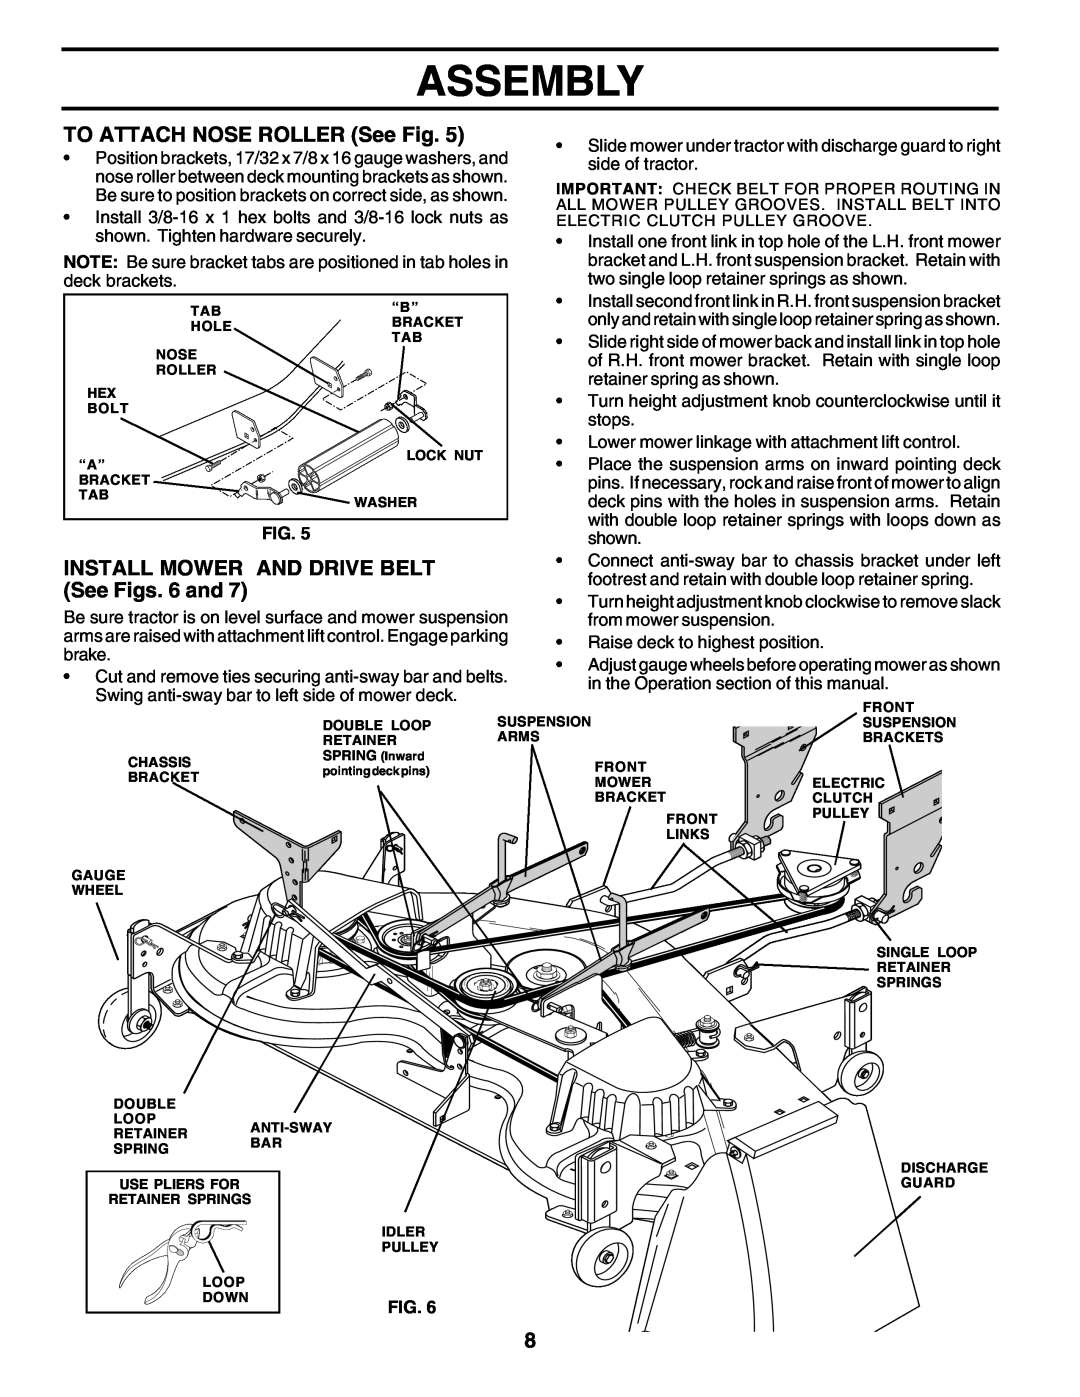 Poulan 176873 owner manual Assembly, TO ATTACH NOSE ROLLER See Fig, Install Mower And Drive Belt, See Figs. 6 and 